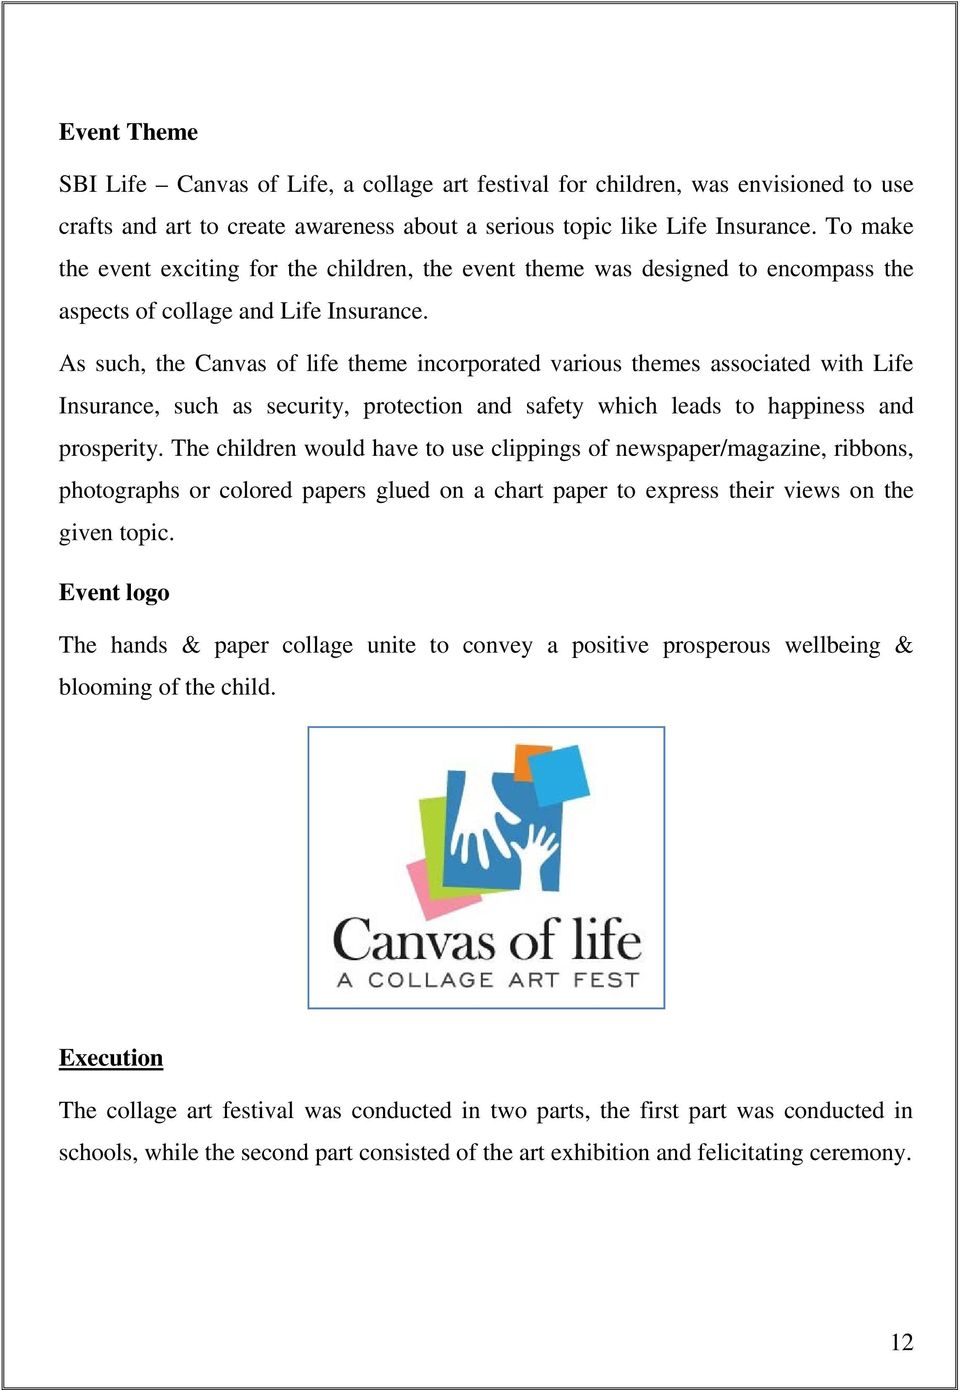 As such, the Canvas of life theme incorporated various themes associated with Life Insurance, such as security, protection and safety which leads to happiness and prosperity.